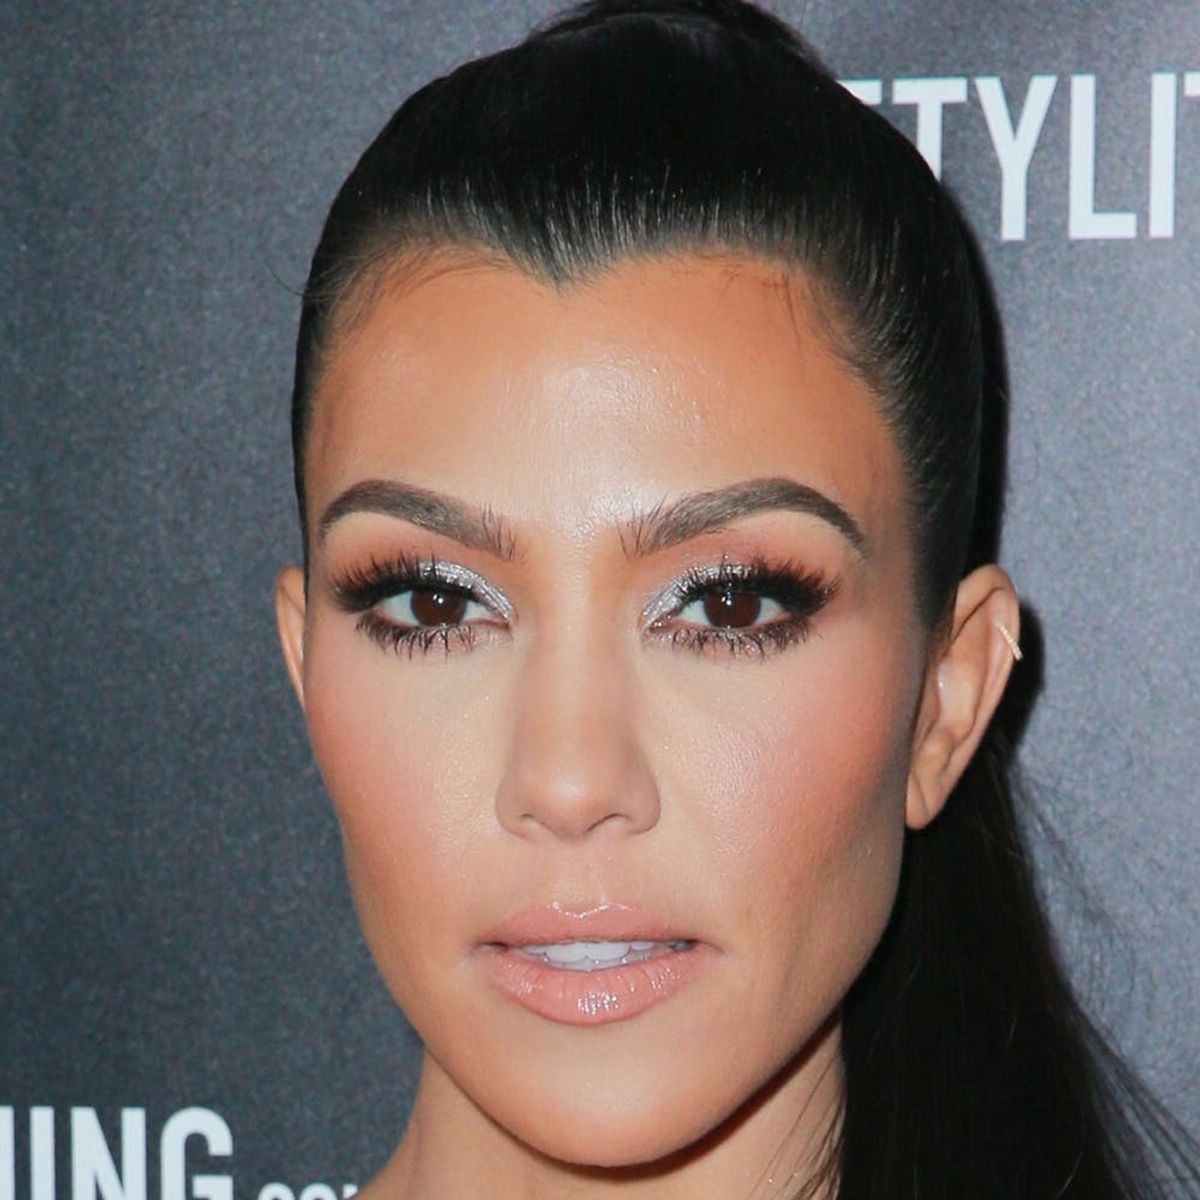 Kourtney Kardashian Is Reportedly Launching a Beauty Line to Round Out the Family Empire